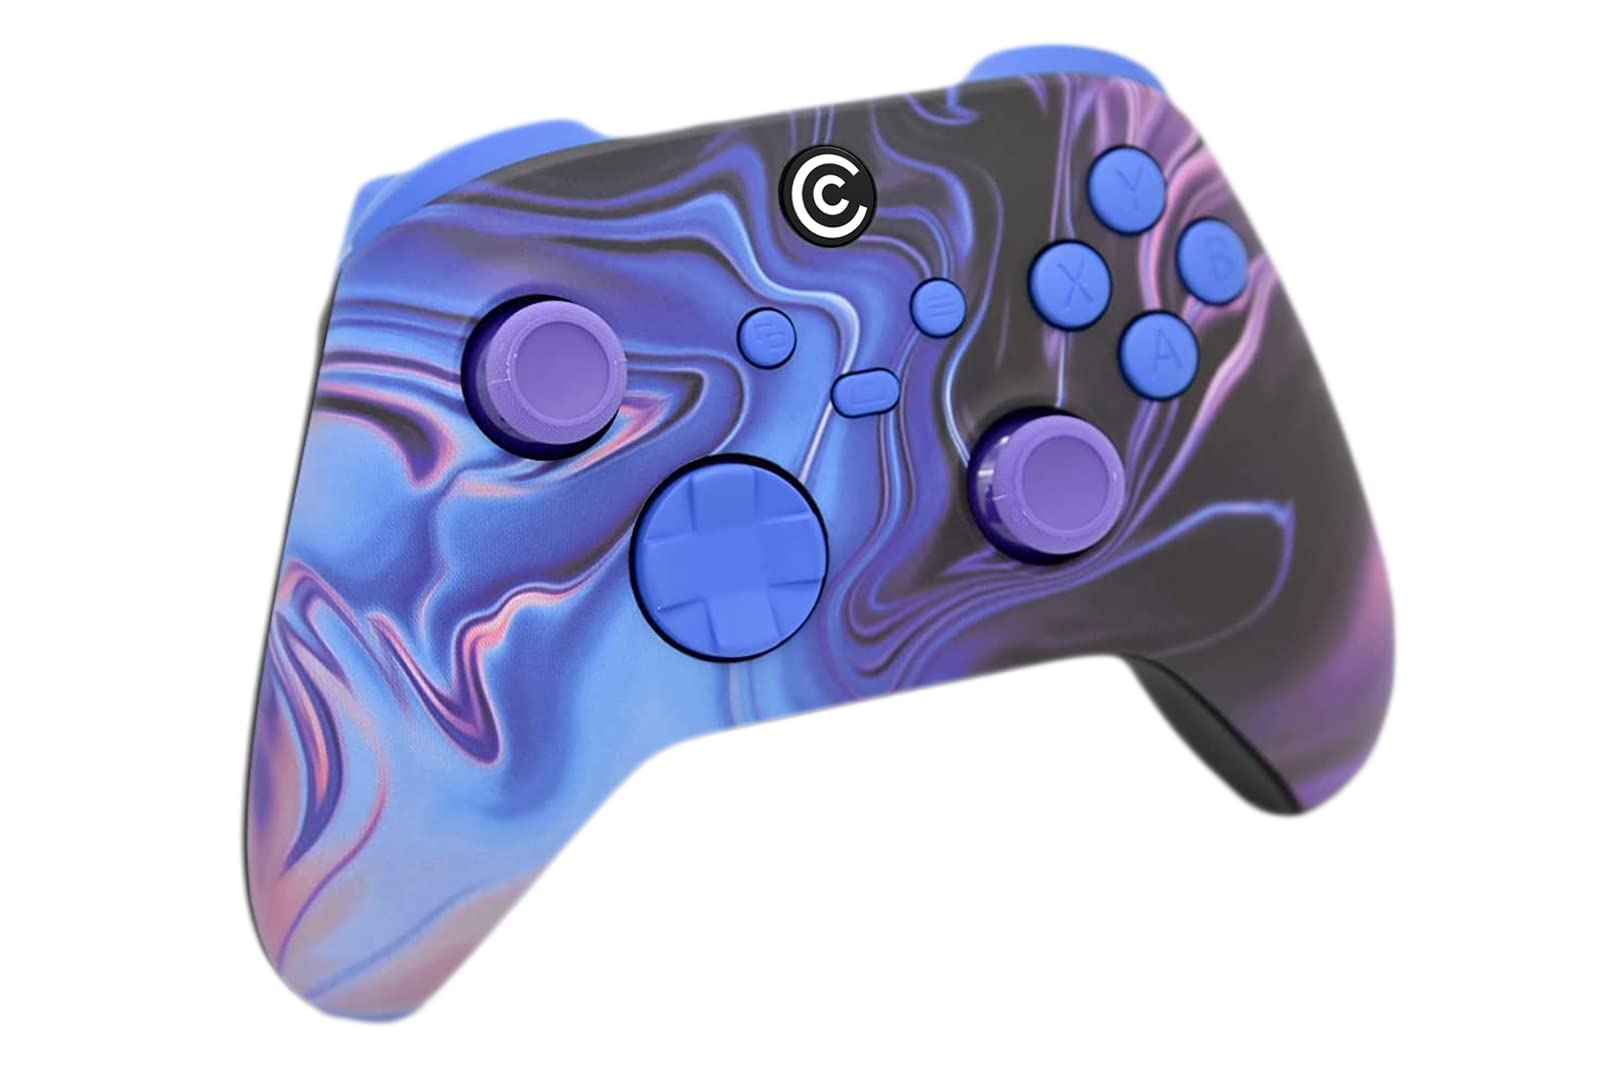 Designer Series Custom Wireless Controller for PC, Windows, Series X/S & One - Multiple Designs Available (Blue & Purple Swirl W/Blue Inserts)